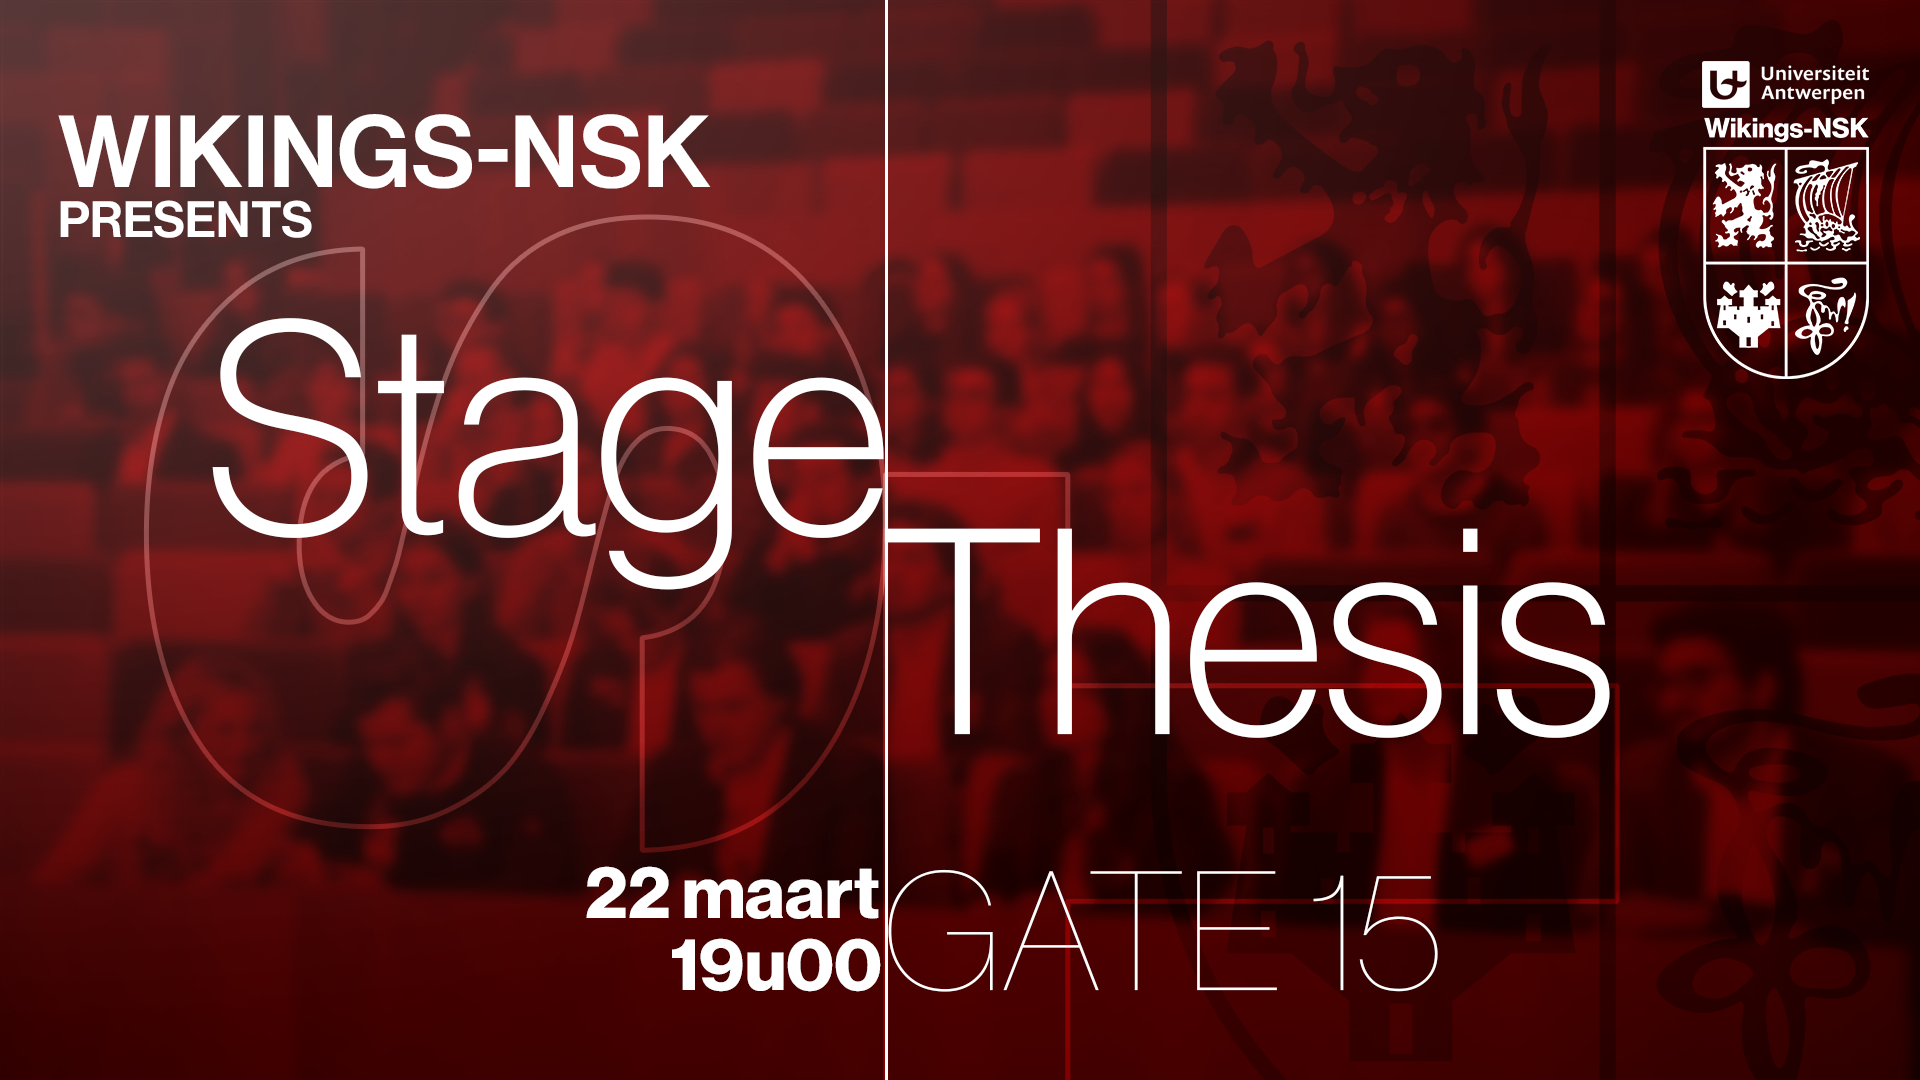 wikings-nsk-stage-thesis